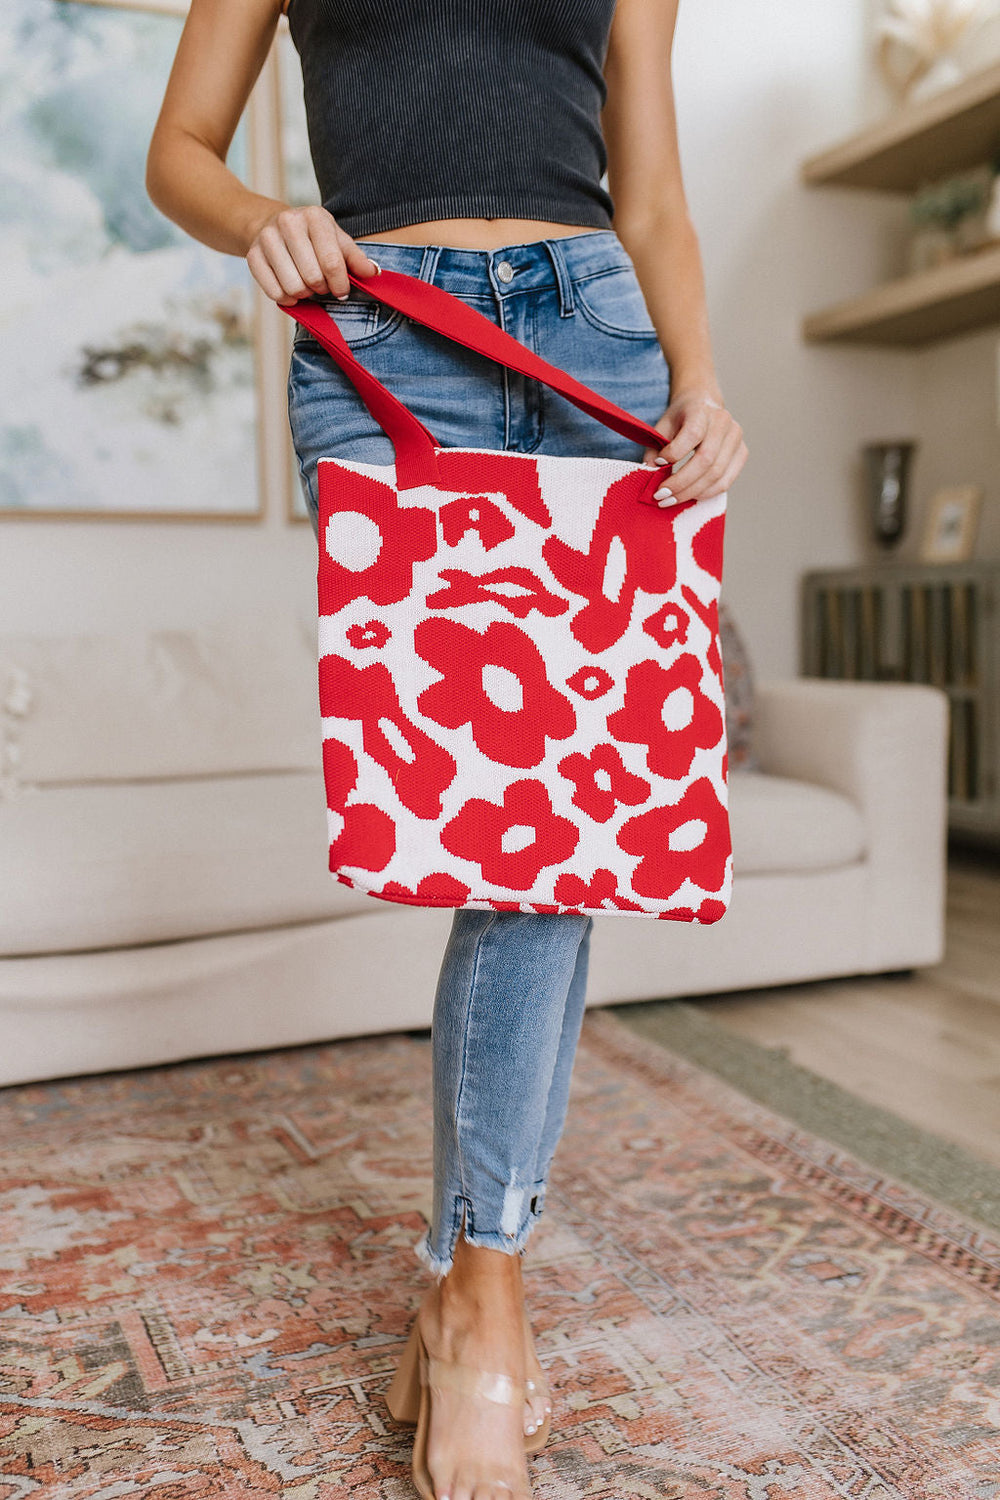 Daisy Tote Bag - Red - Inspired Eye Boutique